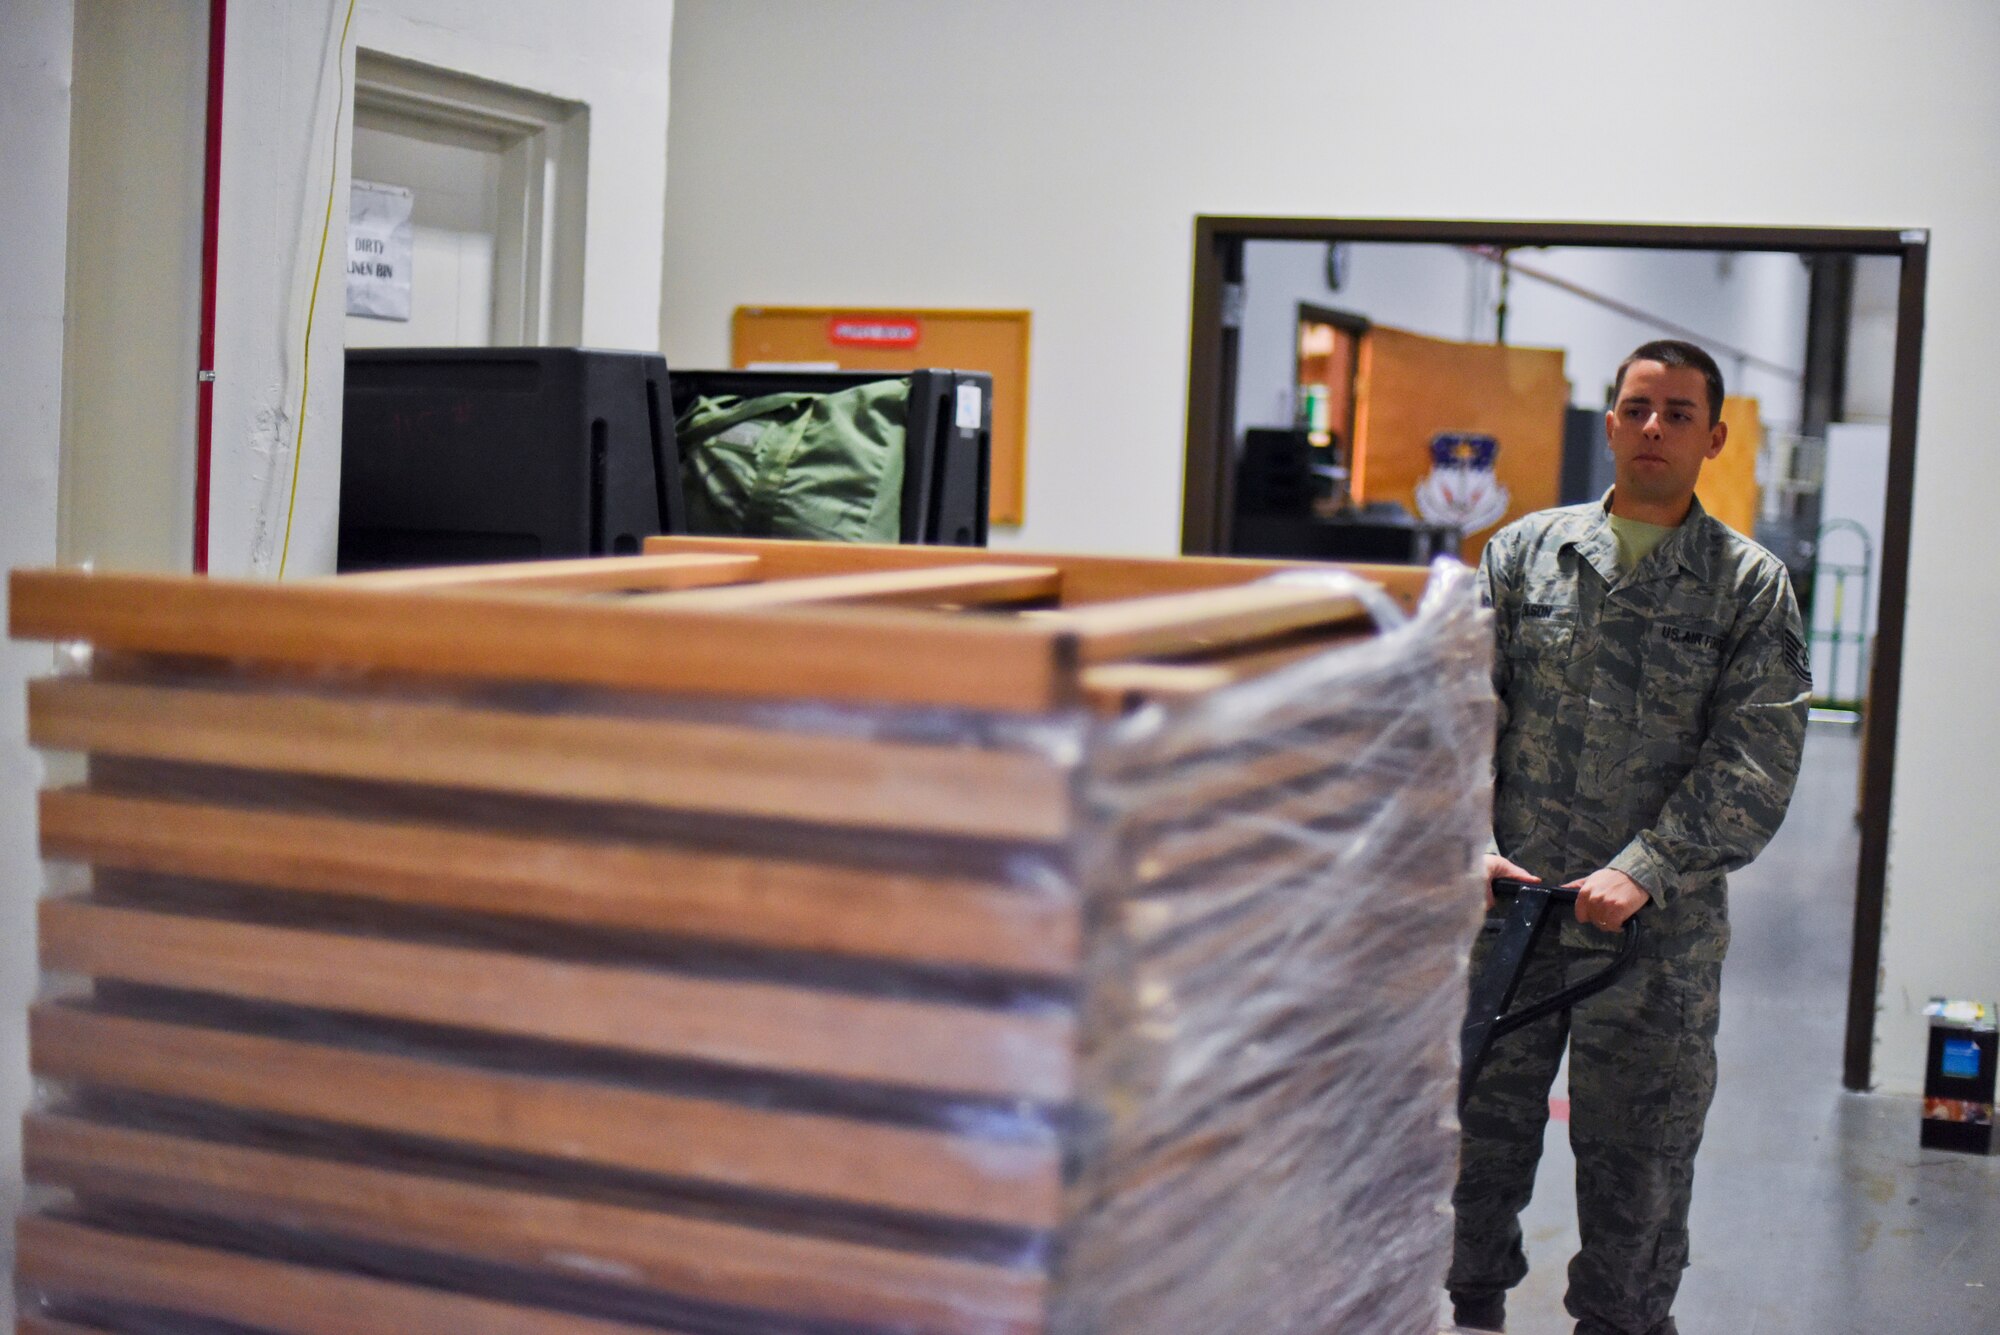 Tech. Sgt. Lee Olson transports new bed frames into a supply warehouse Oct. 20, 2014, at Malmstrom Air Force Base, Mont. Olson has personally ordered and distributed more than $400,000 worth of Force Improvement Program equipment to the base's missile complex. Olson is a 341st Operations Group supply coordinator. (U.S. Air Force photo/Airman 1st Class Collin Schmidt)